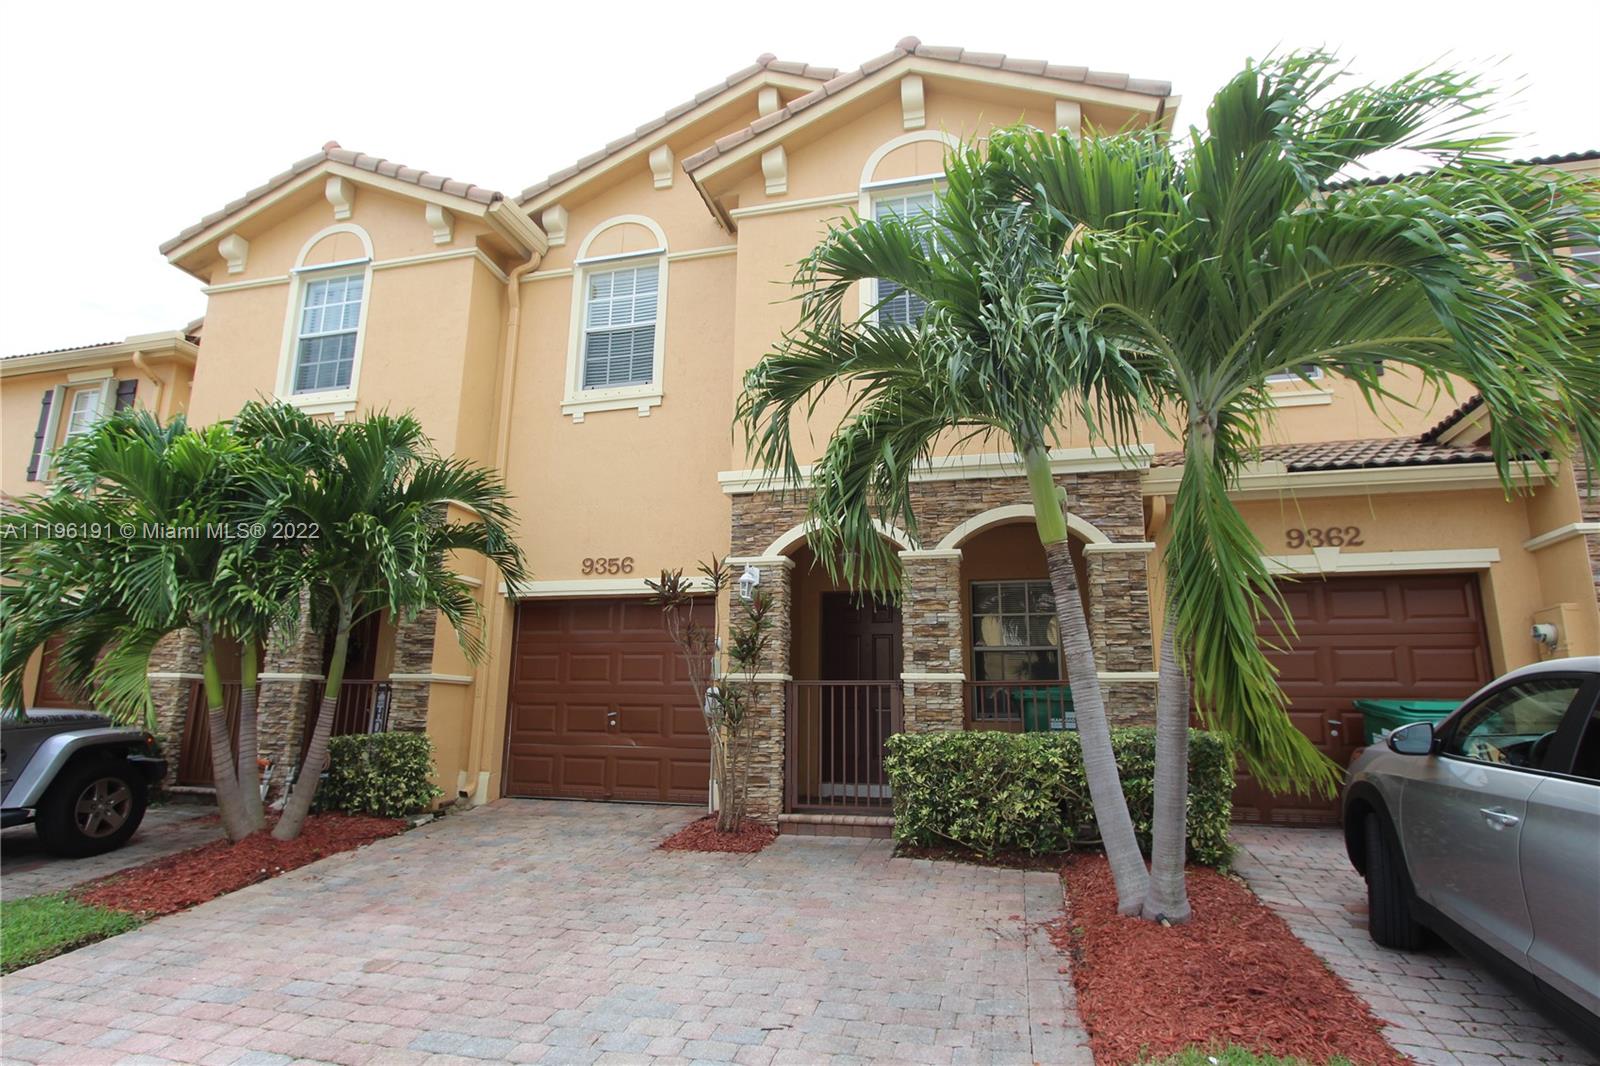 NICE TOWNHOME IN ISLES AT BAYSHORE. SPACIOUS, CERAMIC & LAMINATE FLOORS, DUAL SINK IN THE MASTER BEDROOM, FENCED PATIO, ONE CAR GARAGE. ENJOY THE NICE CLUBHOUSE PLENTY OF AMENITIES.